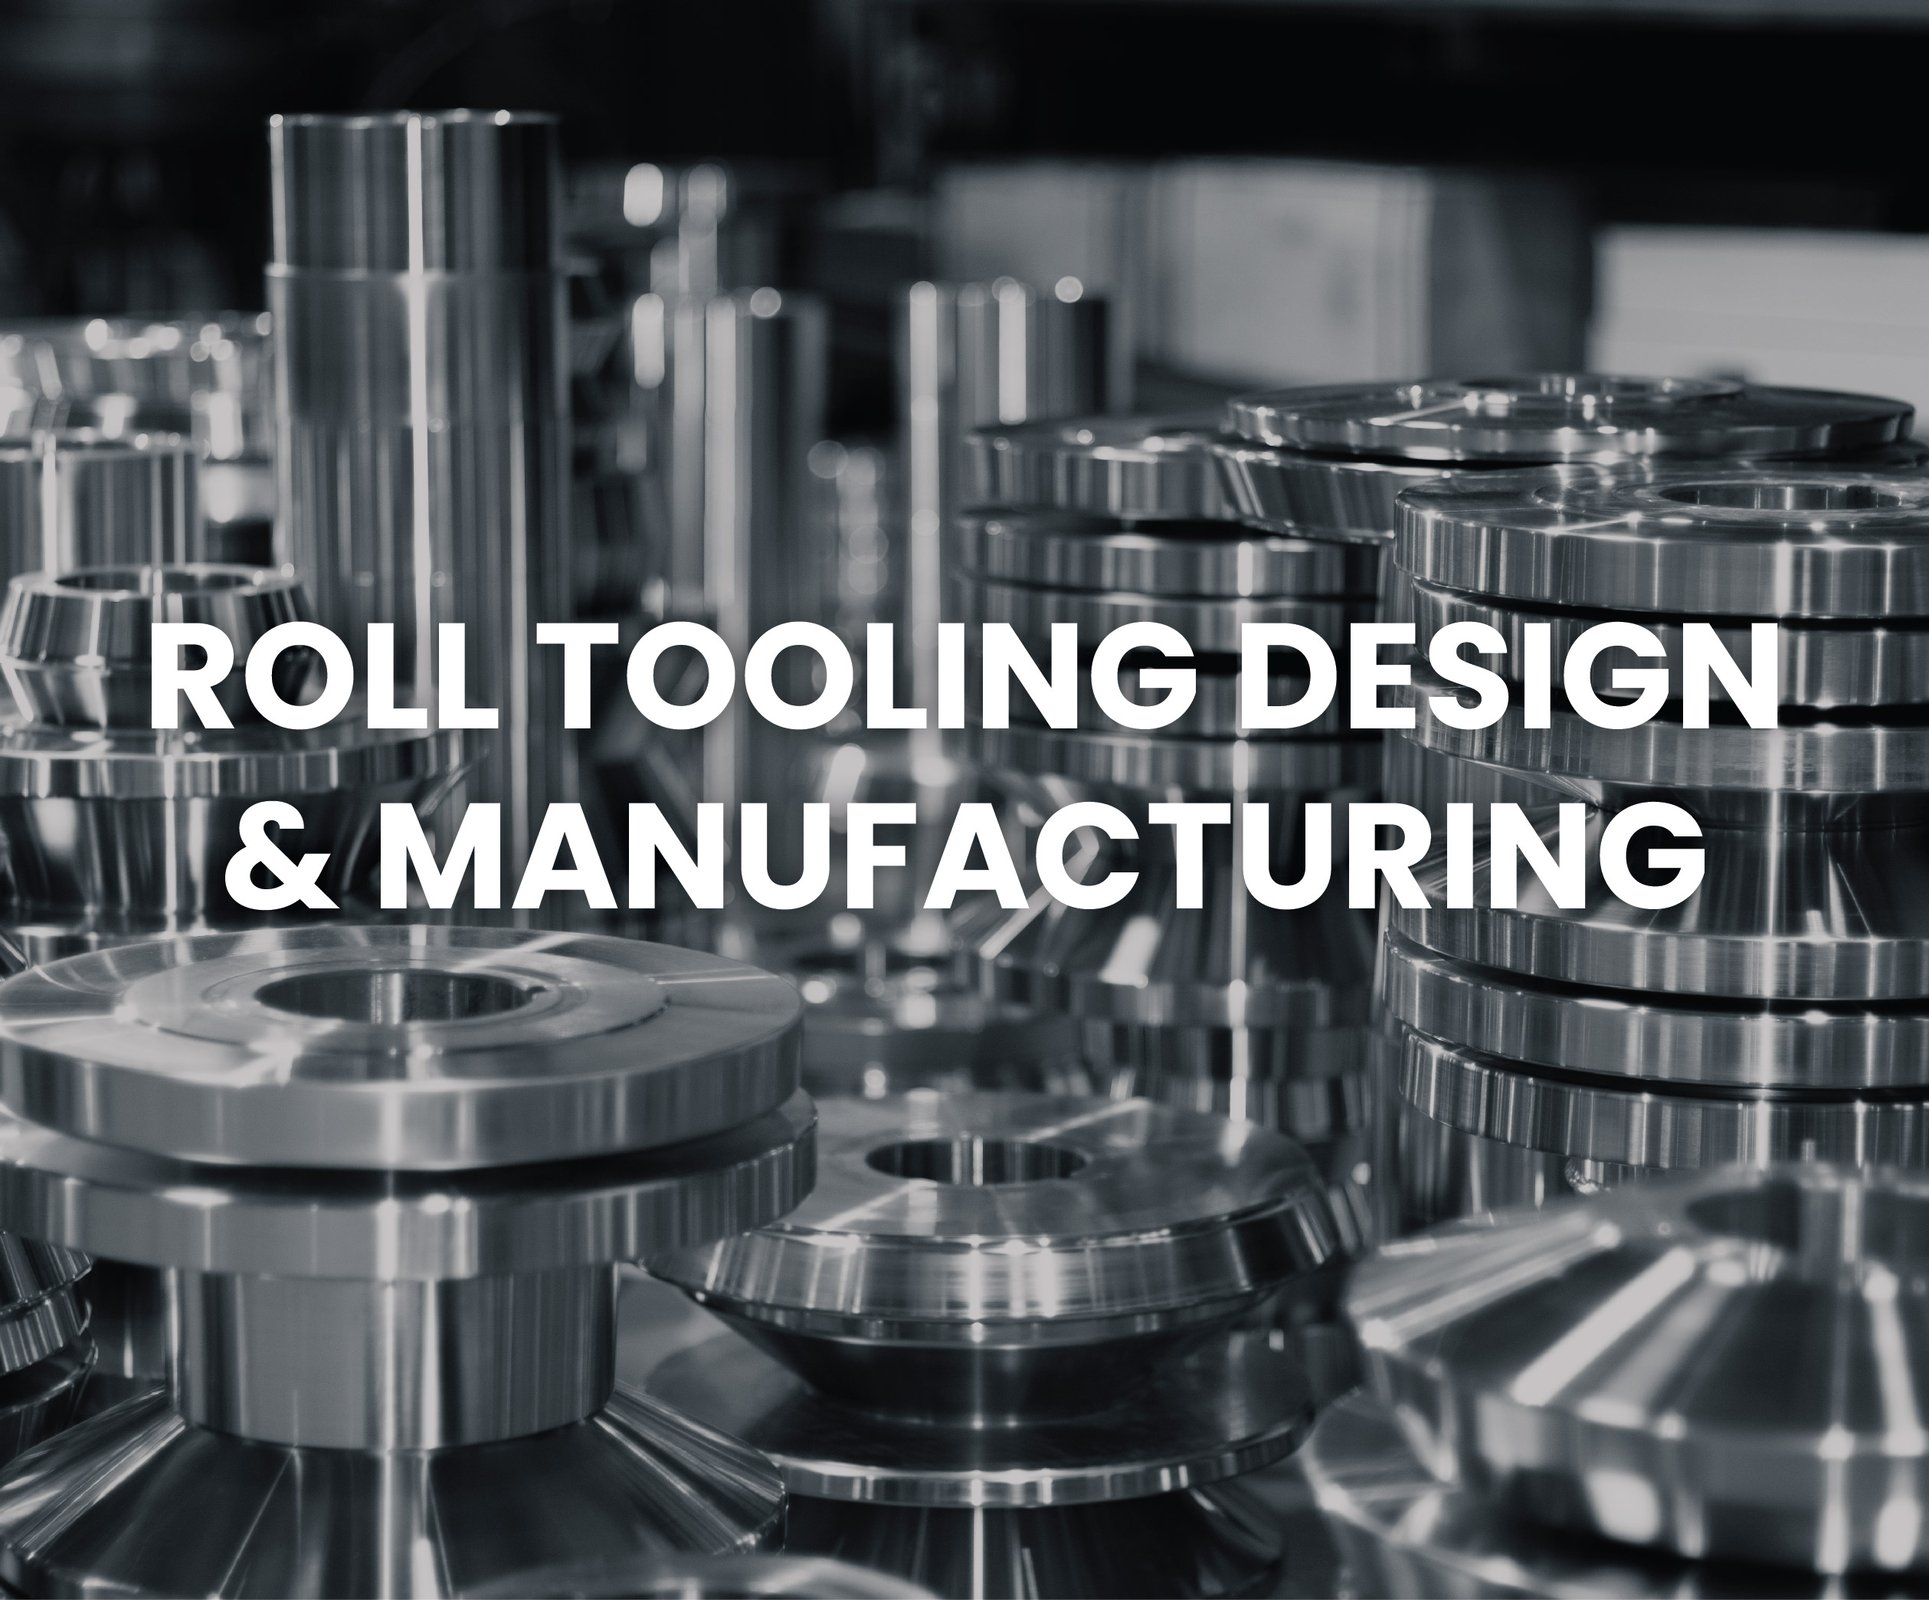 ROLL TOOLING DESIGN & MANUFACTURING